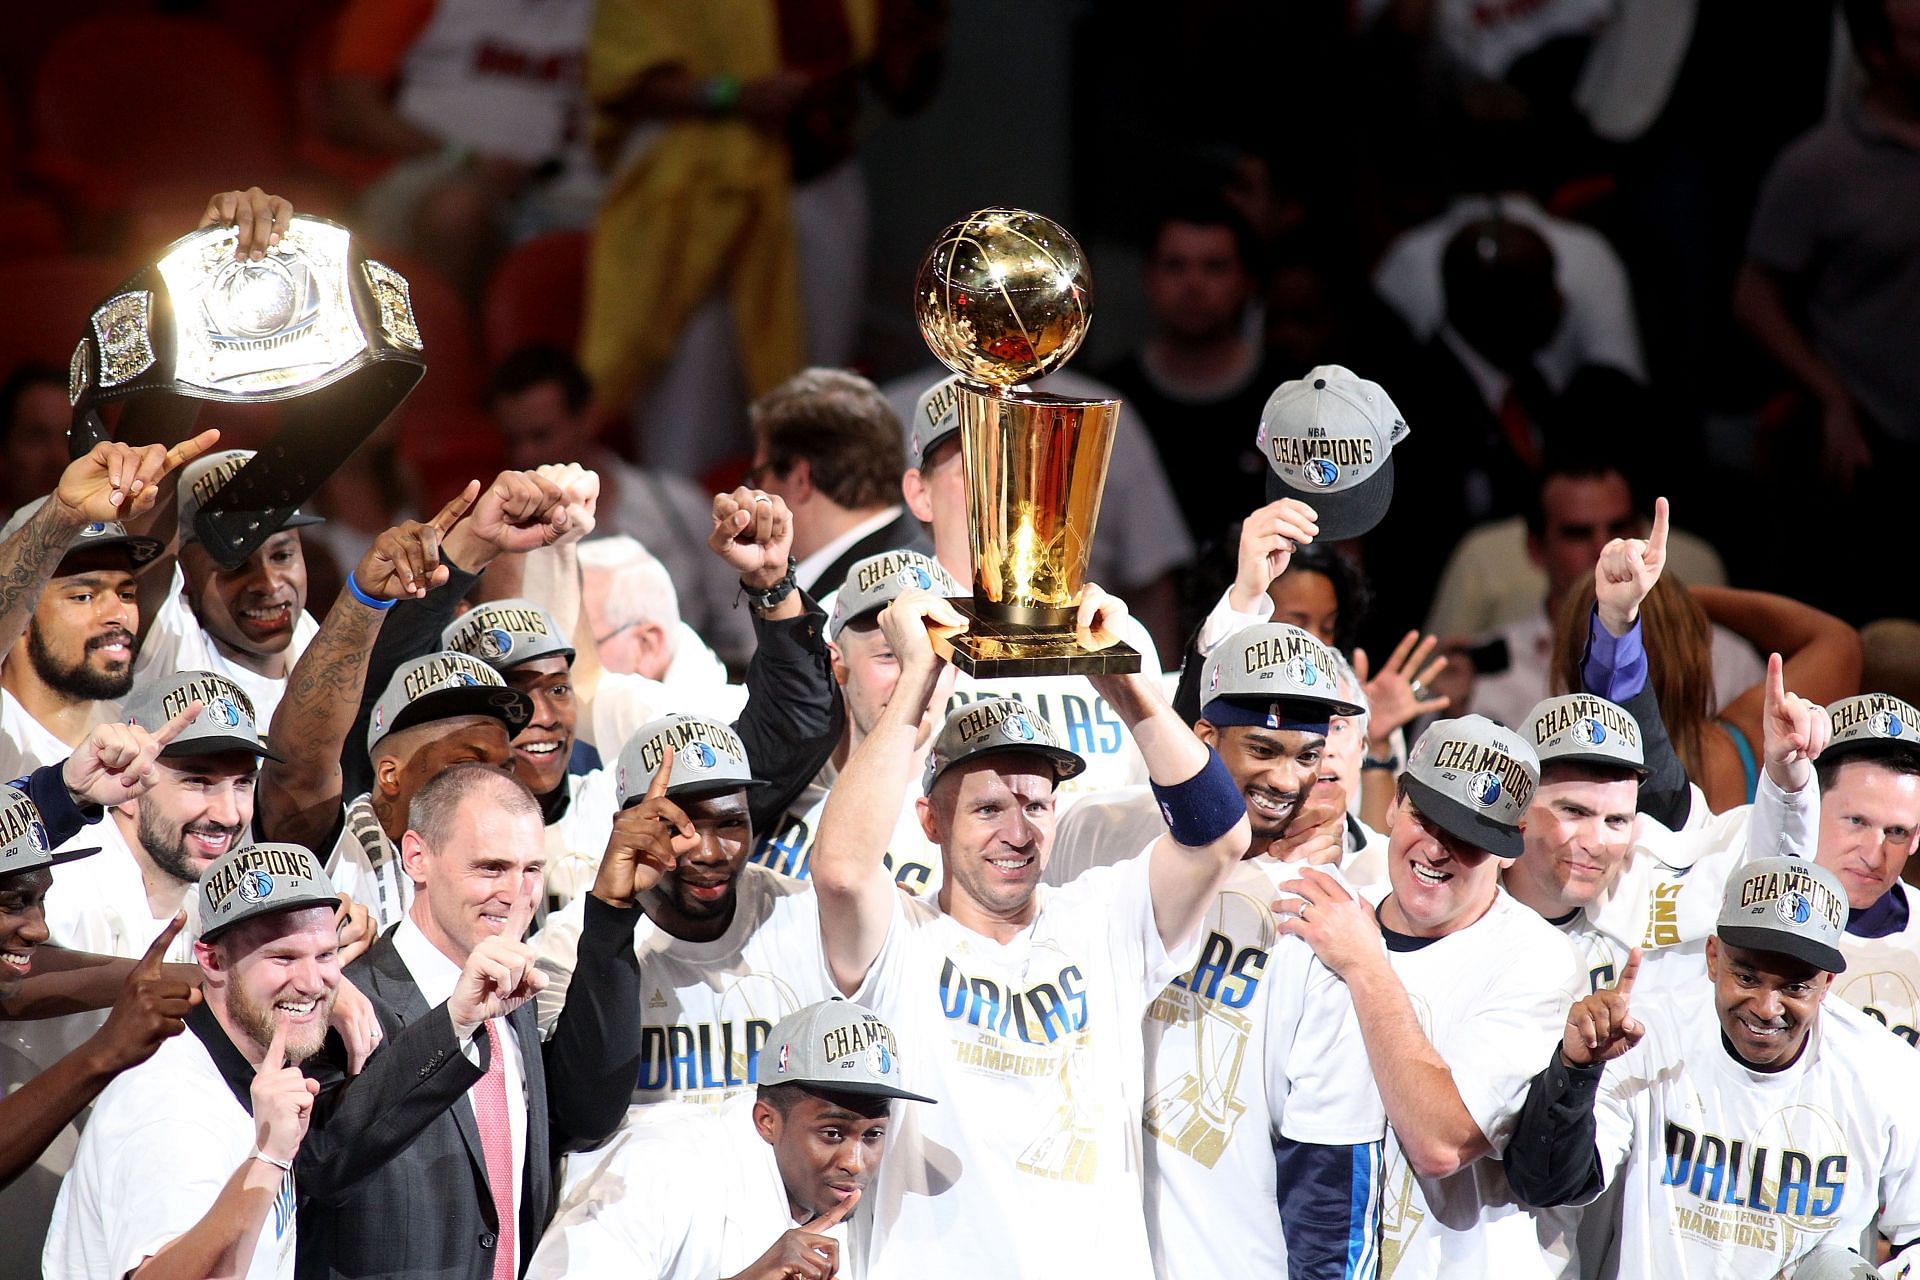 The Dallas Mavericks hoisted the championship trophy after defeating the heavily-favored Miami Heat in the 2011 NBA Finals.